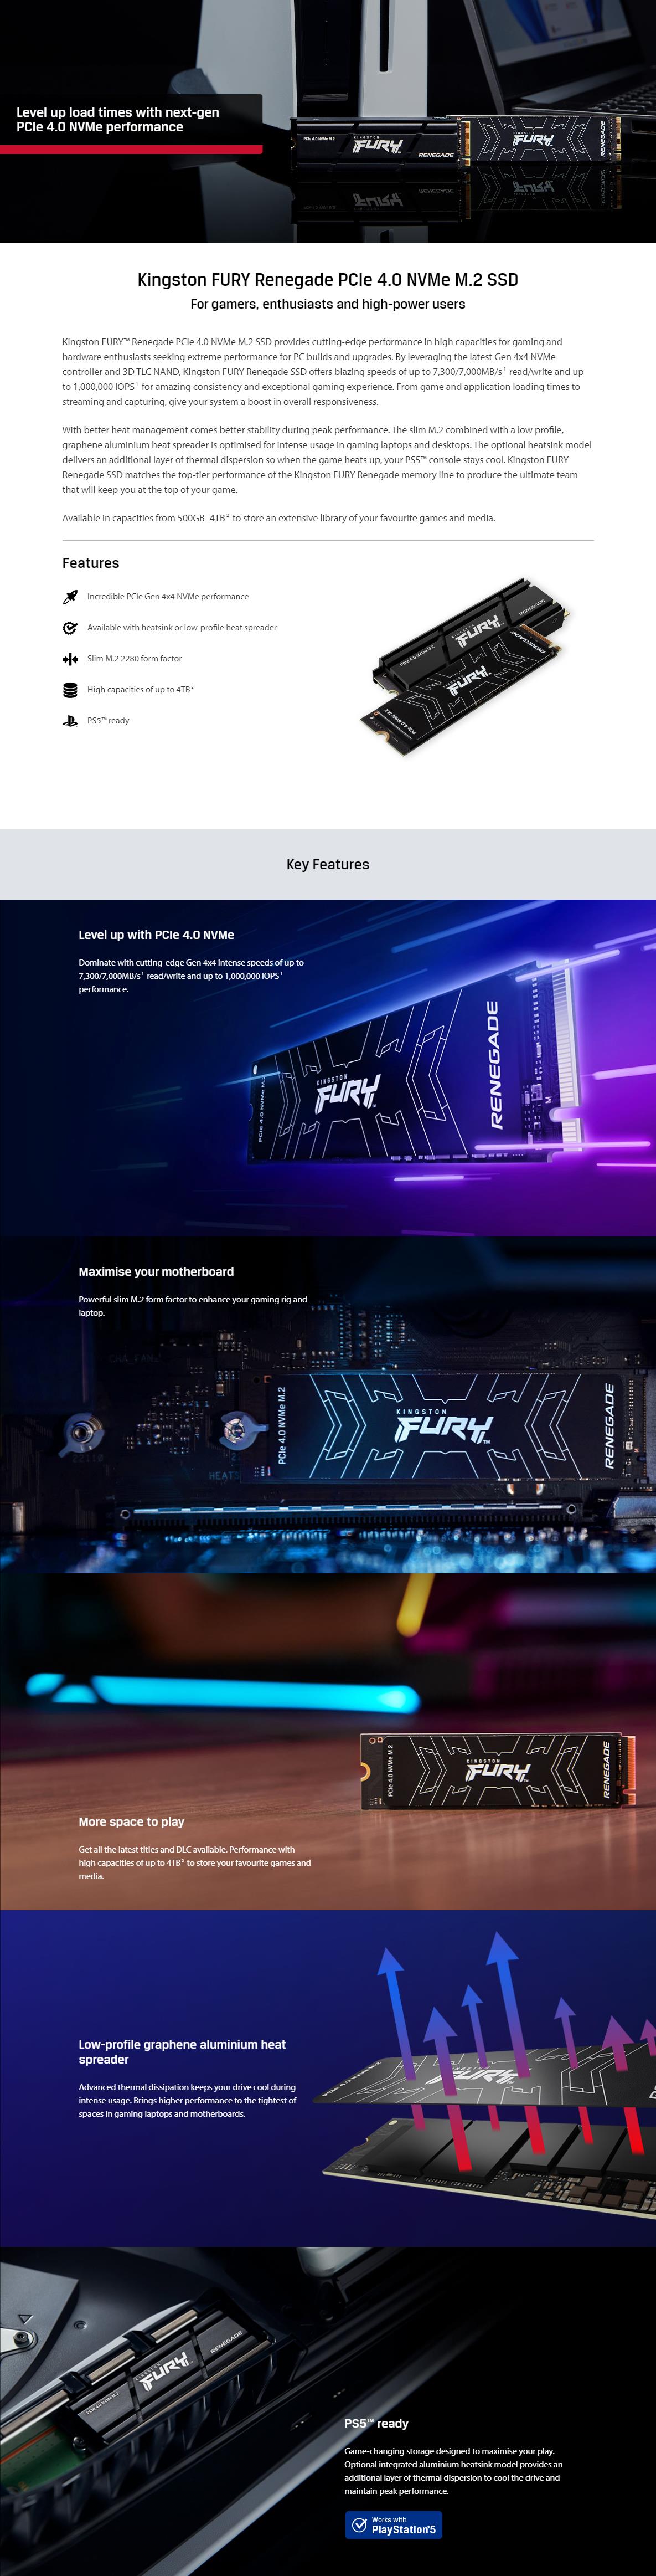 A large marketing image providing additional information about the product Kingston FURY Renegade w/Heatsink PCIe Gen4 NVMe M.2 SSD - 2TB - Additional alt info not provided